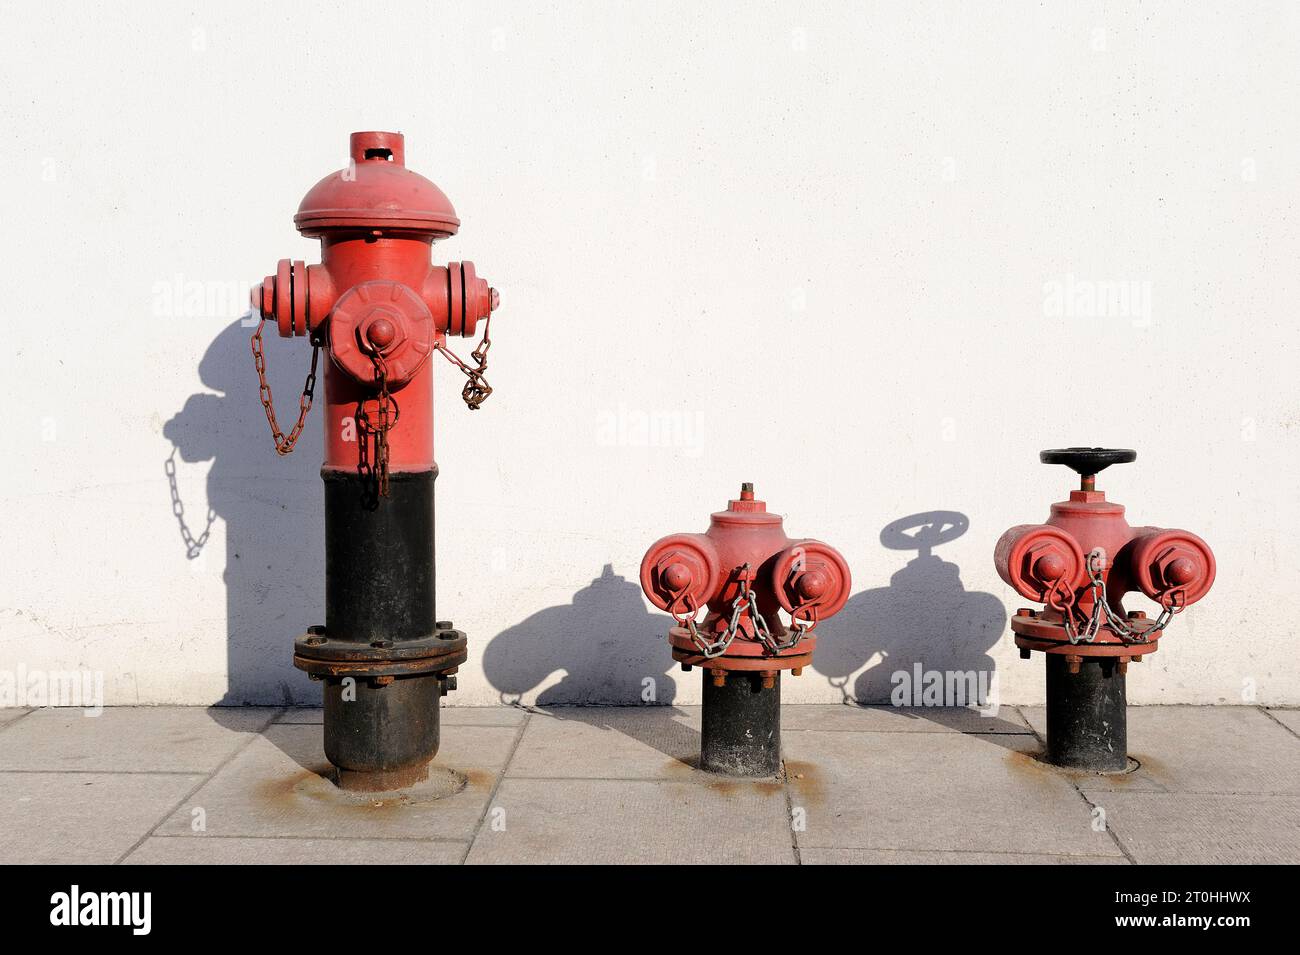 Fire hydrant connection points for firefighters can tap into a water supply Stock Photo